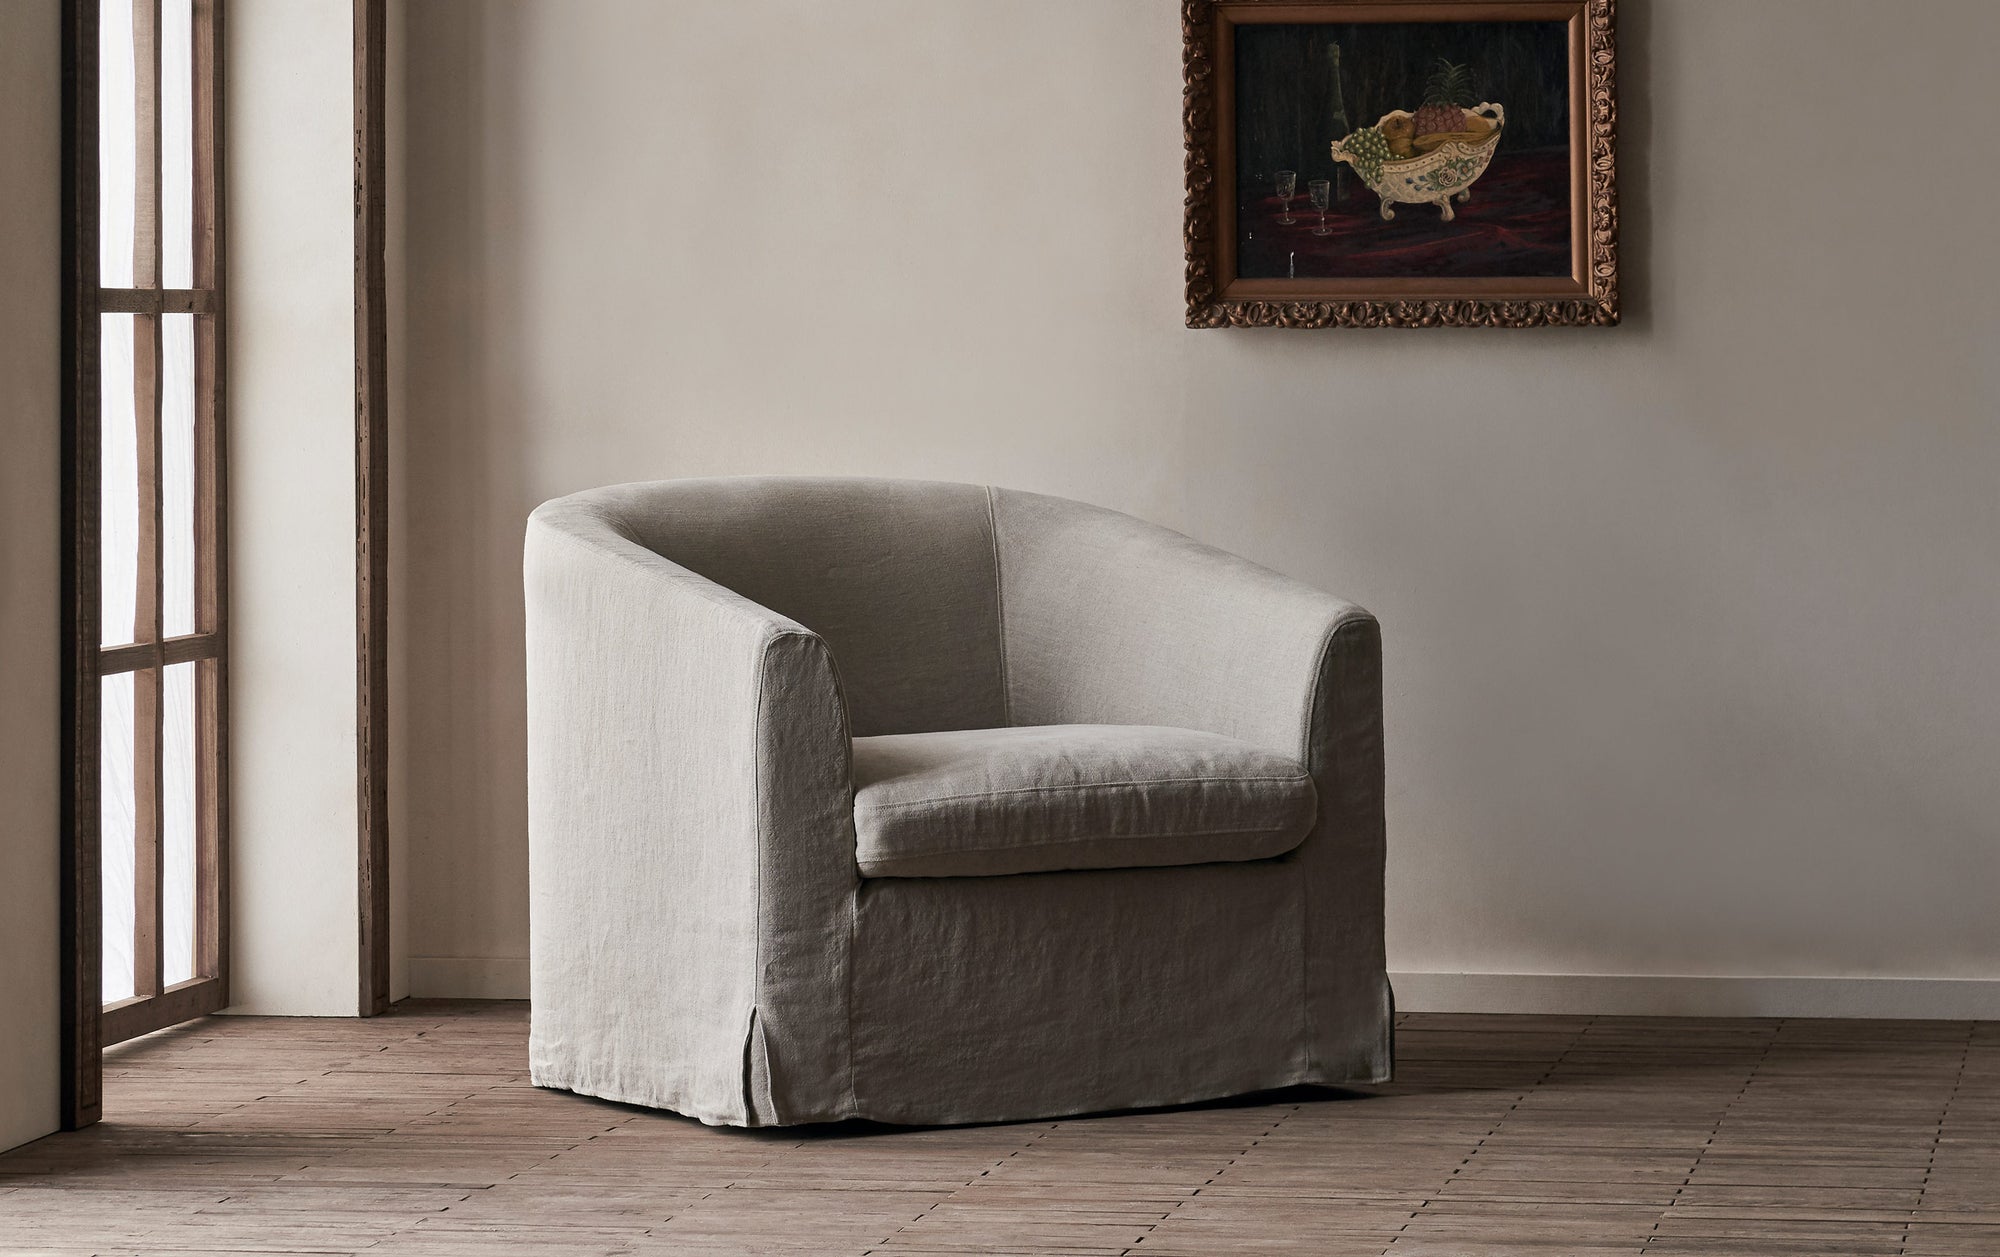 Ziki Swivel Chair in Oat Flour, a medium taupe Light Weight Linen, in front of a greige wall with a hanging framed painting